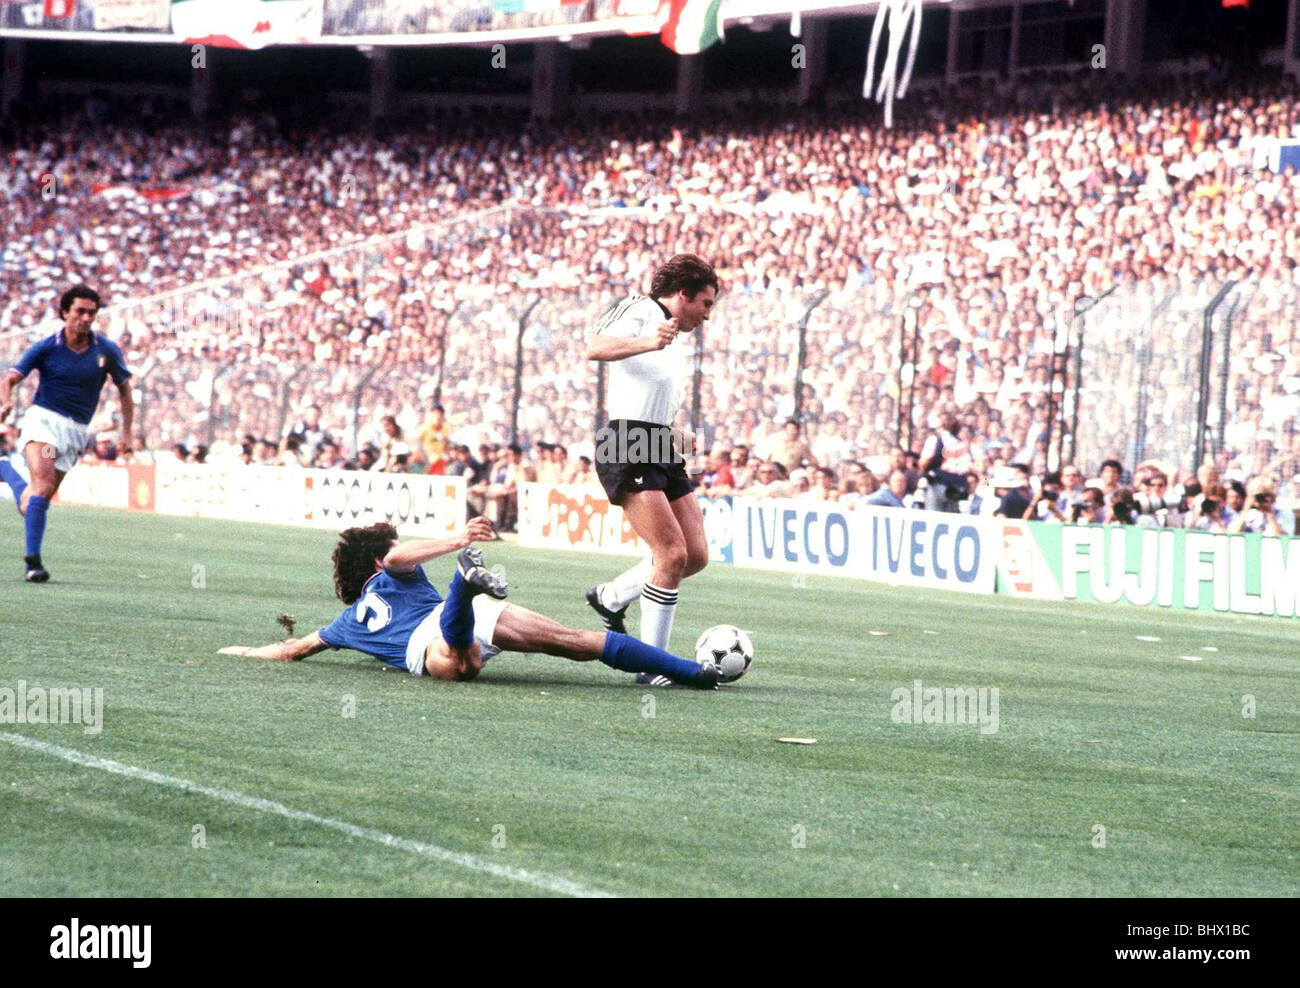 Collovati (Italy) tackles Fischer (West Gemany) 1982 in World Cup final Italy 3 West Germany 1 Stock Photo